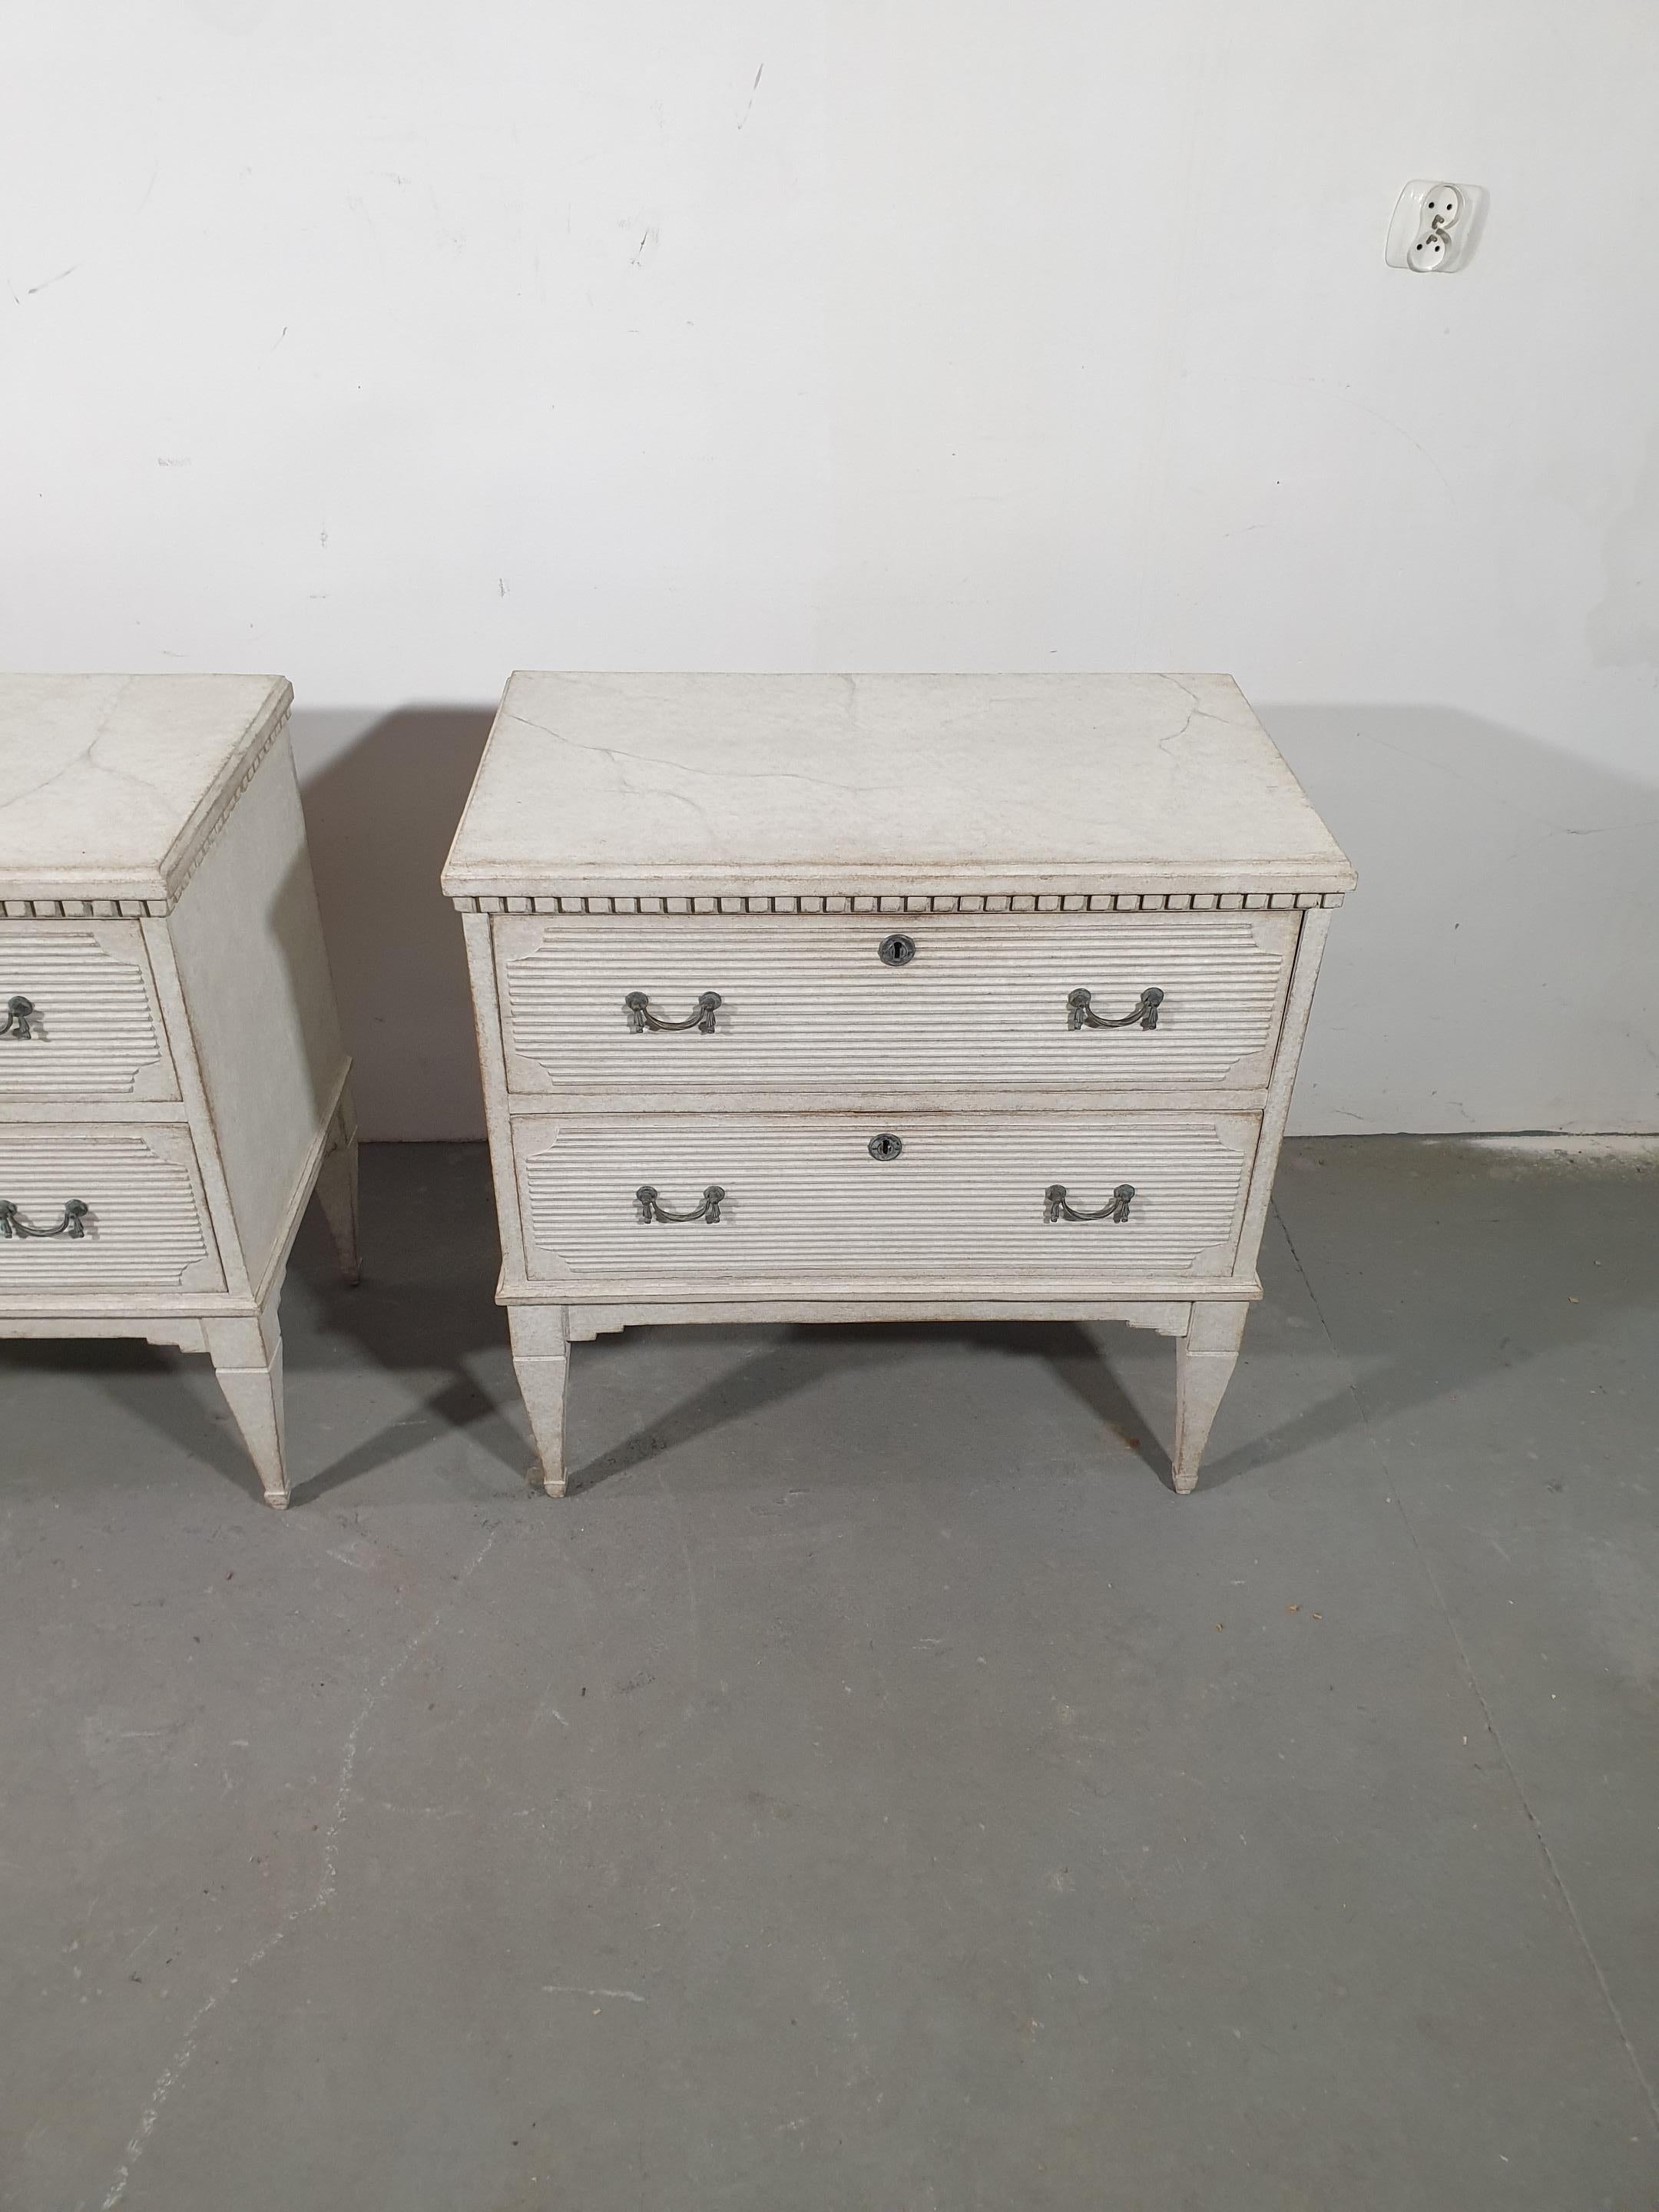 A pair of swedish Gustavian style chests from circa 1890 with rich light gray painted finish, carved dentil molding, two reeded drawers and tapered legs. Embrace the understated elegance of Swedish Gustavian design with this exquisite pair of chests